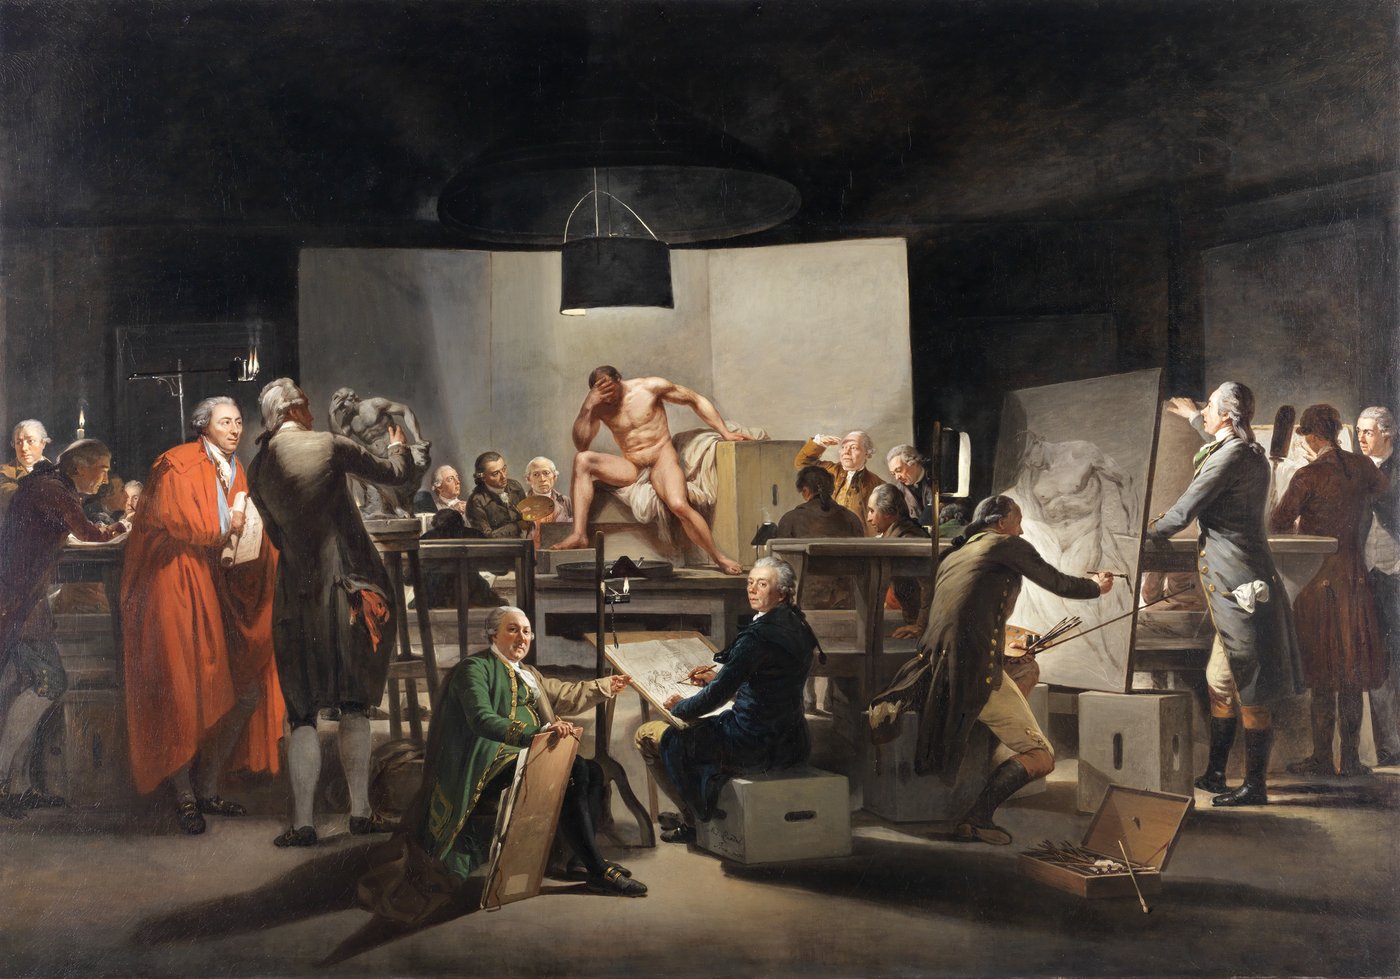 The painting shows a group of 20 elegantly dressed artists positioned in a circle around a male nude model. They are in the process of depicting him in a realistic manner. Some are painting on large canvases or drawing on sheets of paper, while others are sculpting the nude model. In the room there are several wooden standing tables and crates with oval openings, allowing them to be carried. These objects serve as shelves, seats or holders for canvases. The male nude model is on a pedestal in the middle of the room. He is sitting with his legs spread on wooden crates, over which a white fabric is draped, holding his head. His face is not visible. He has short brown hair, which distinguishes him from the other men, who wear white powdered baroque wigs with curly rolls. It is evening and the room is lit with multiple=